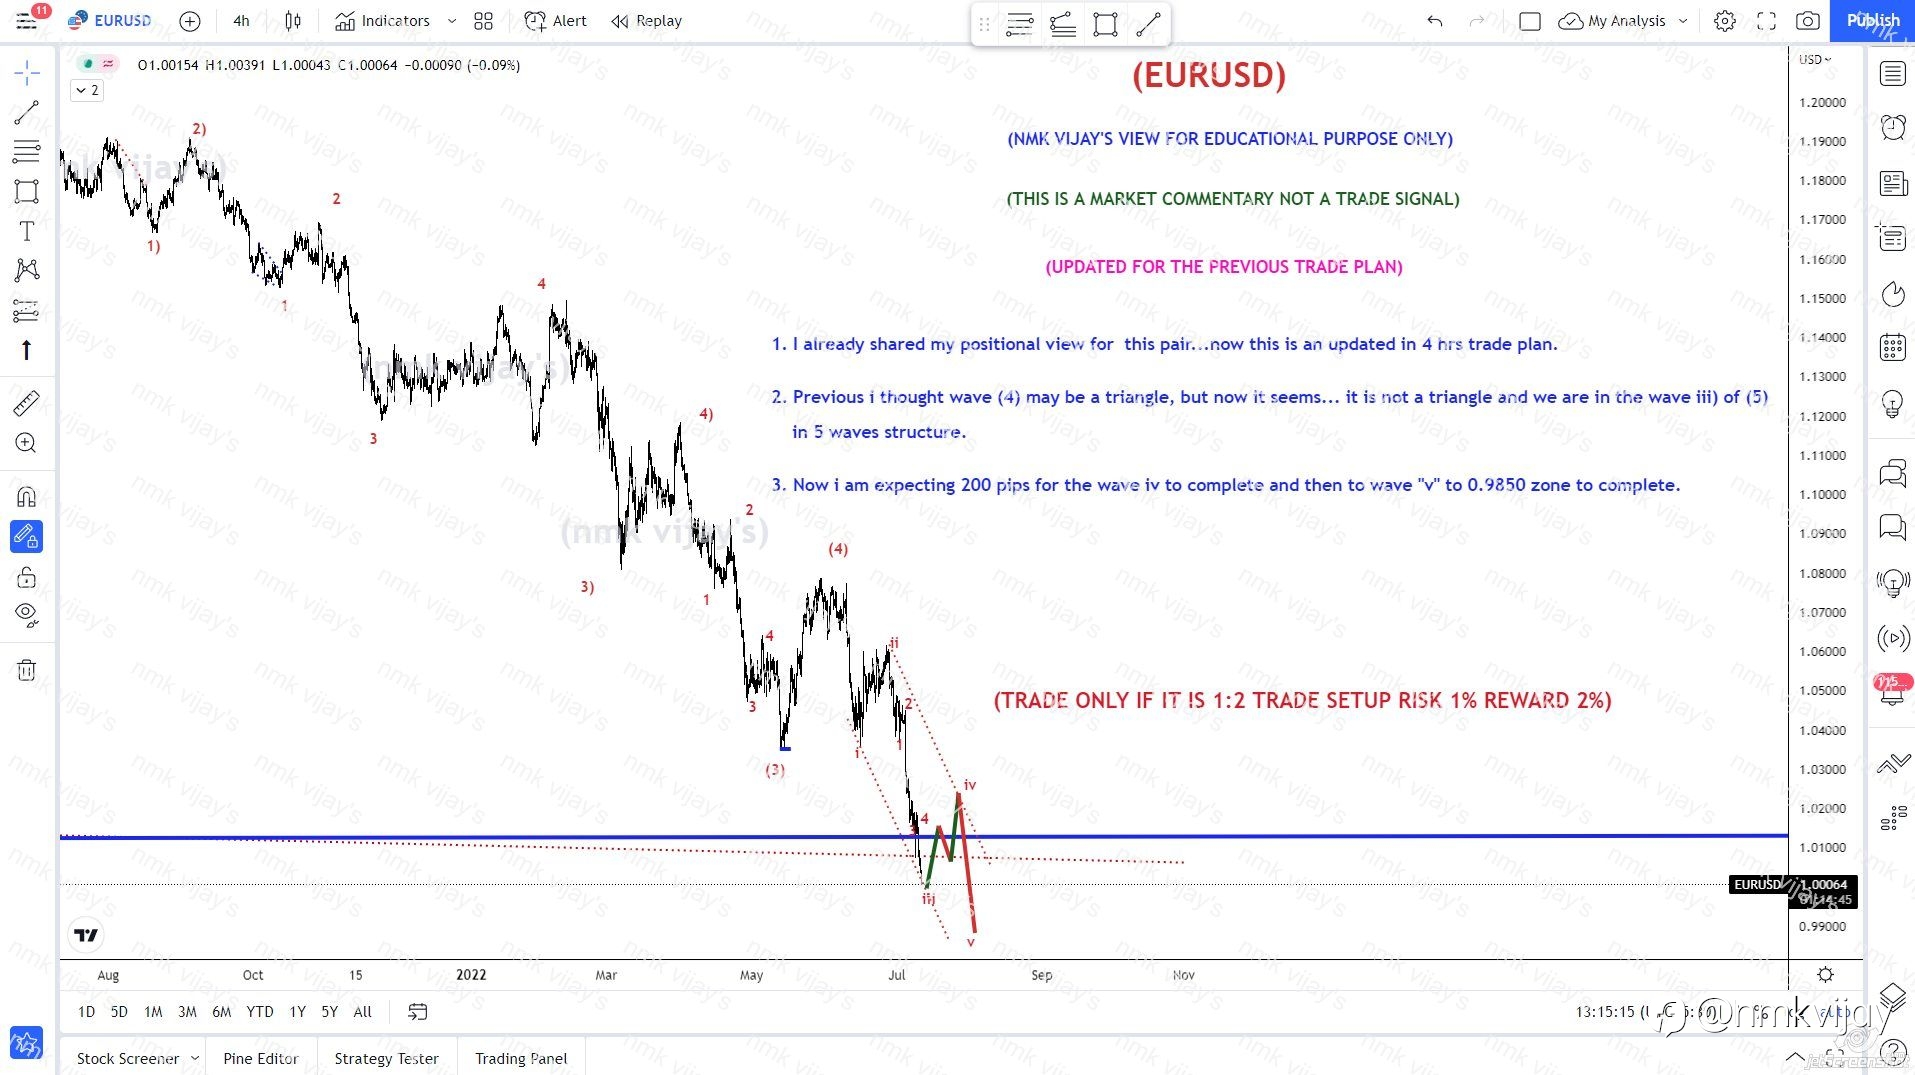 EURUSD-Intermediate waves updated for previous positional view.